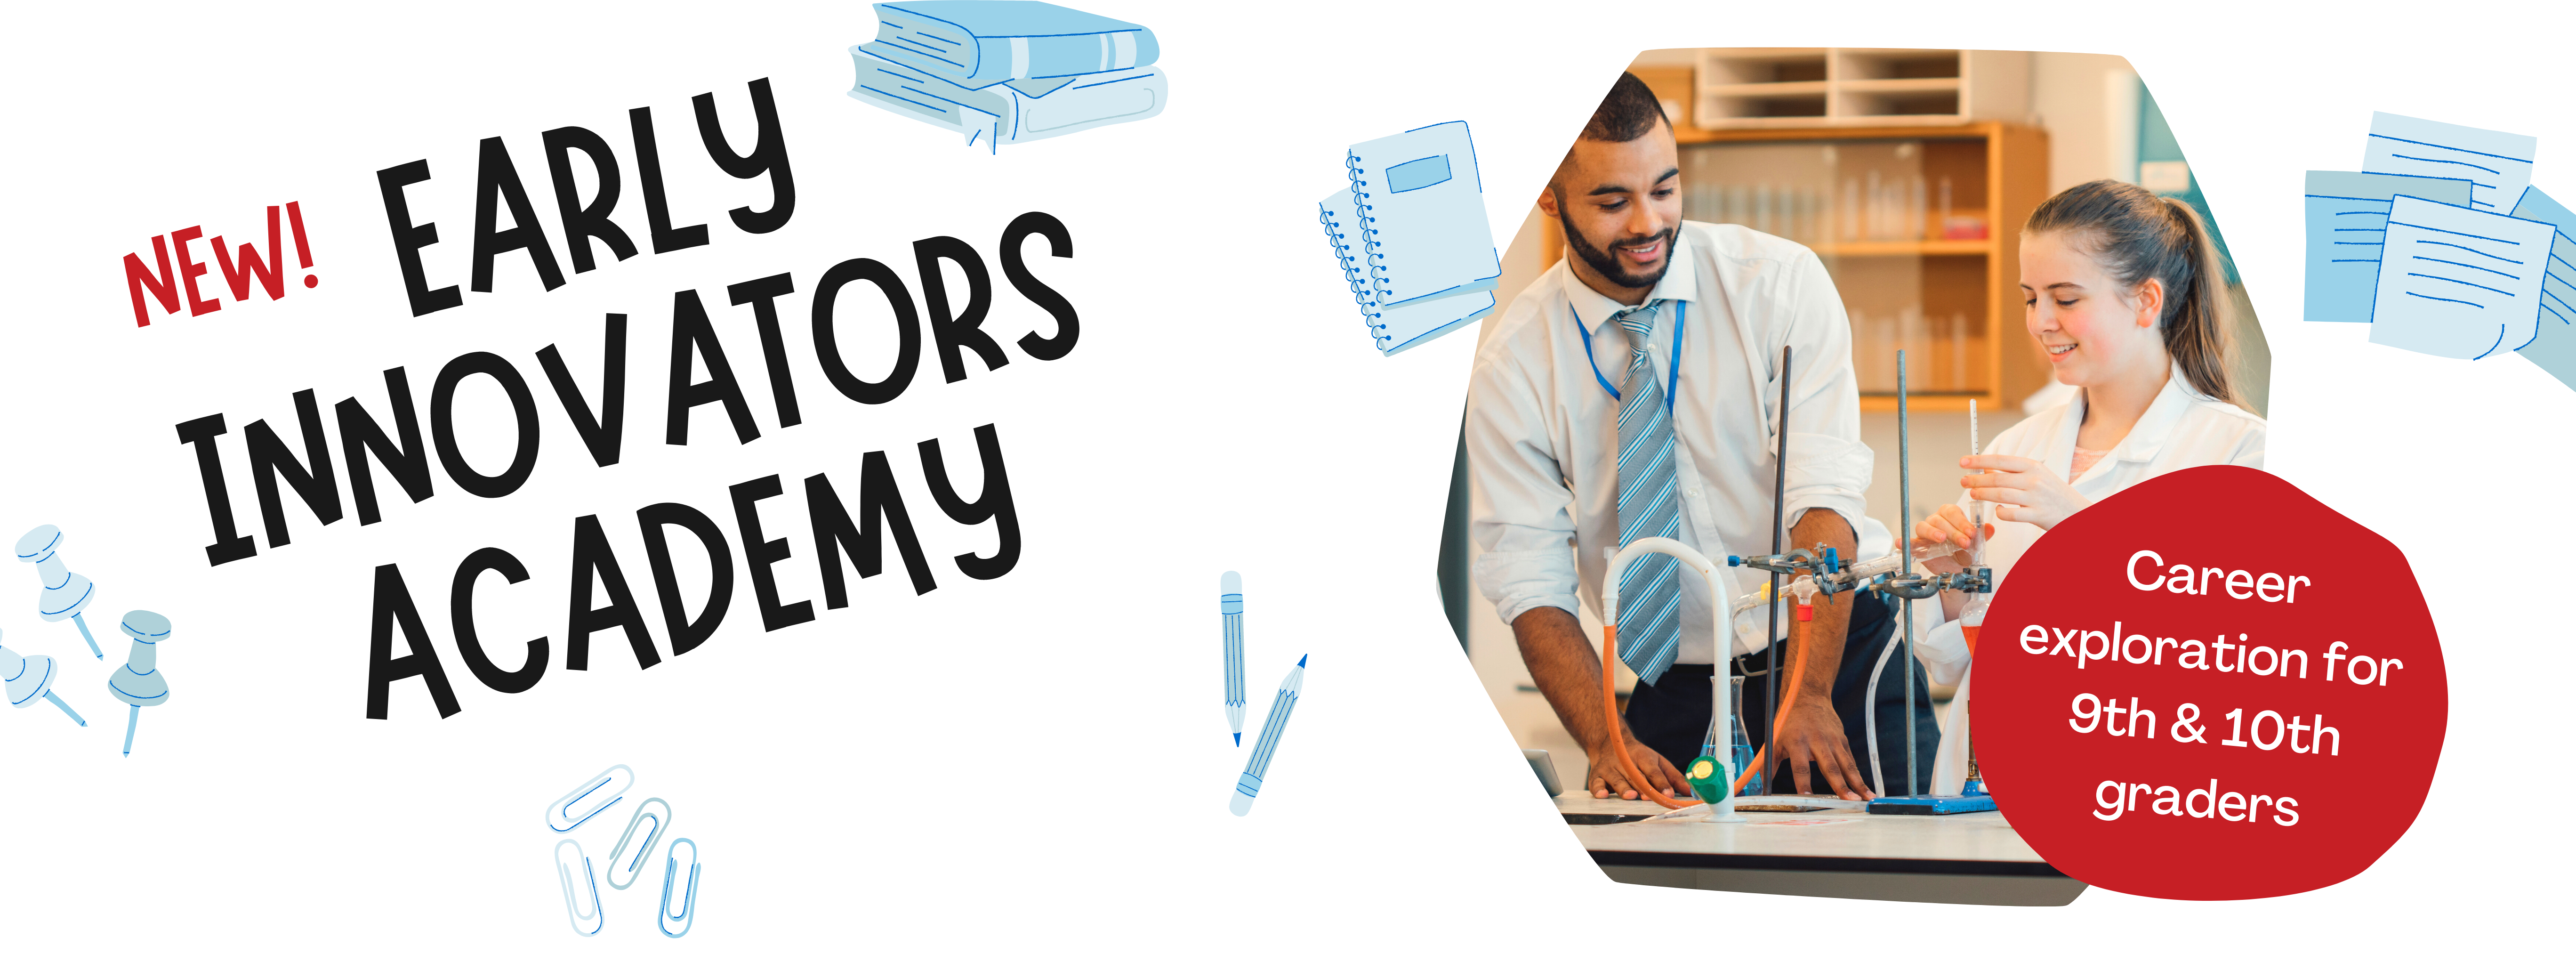 Early Innovators Academy banner